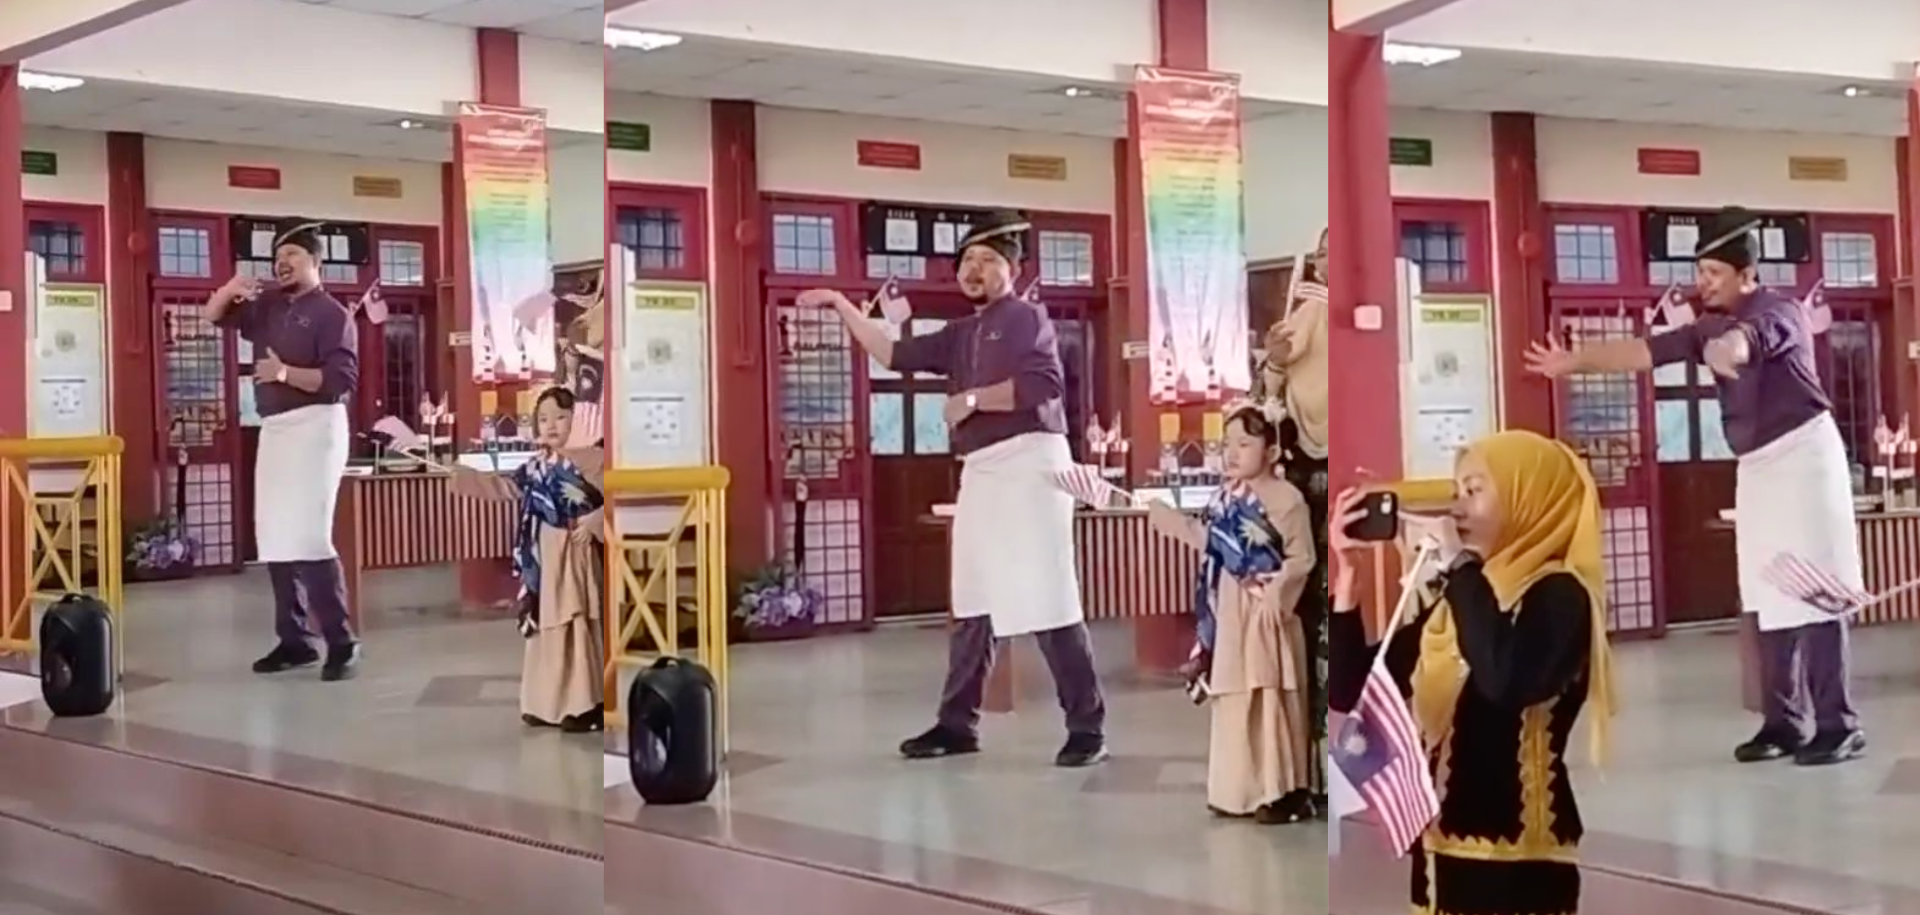 A passionate teacher had gone viral while performing sign language in school!